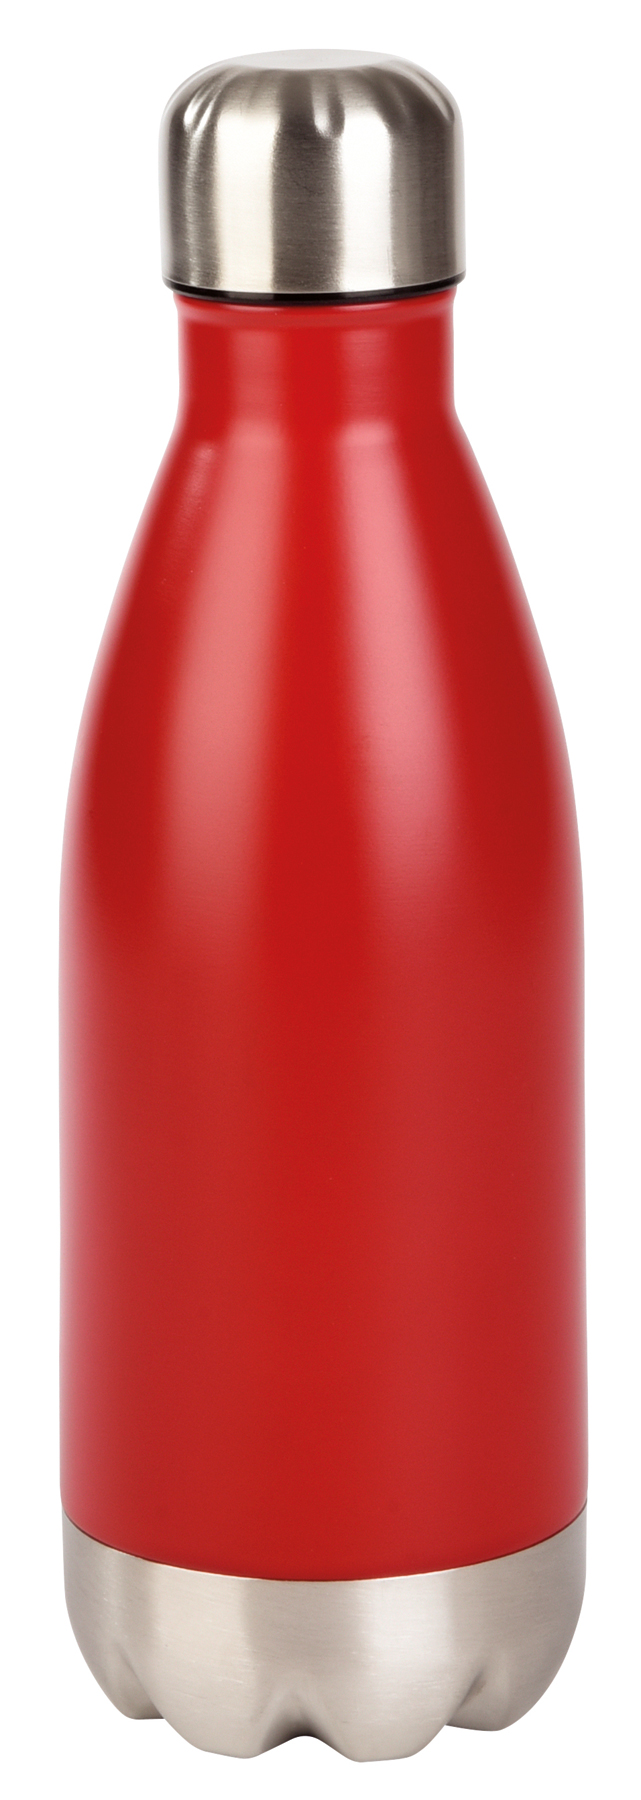 Travel flask PARKY - red